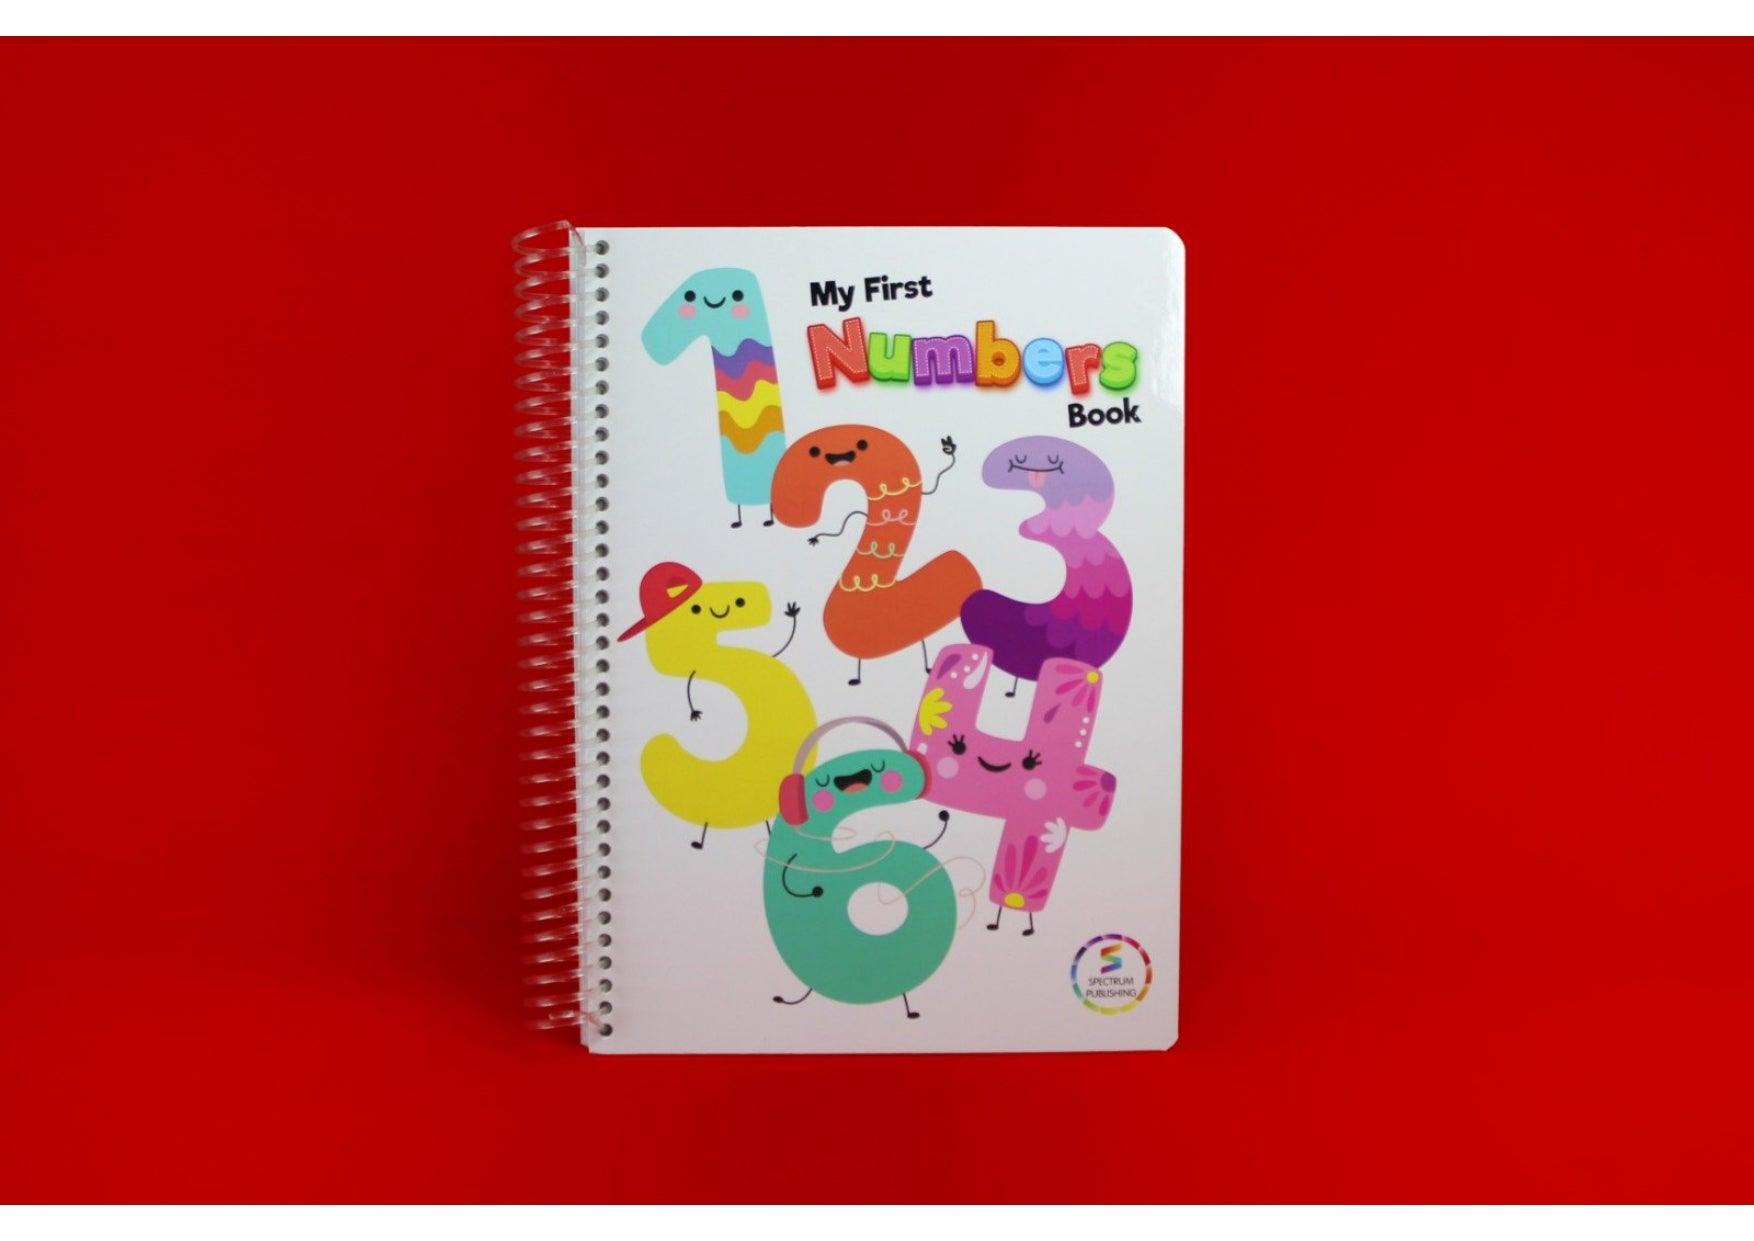 My first Numbers book - Ourkids - Spectrum Publishing